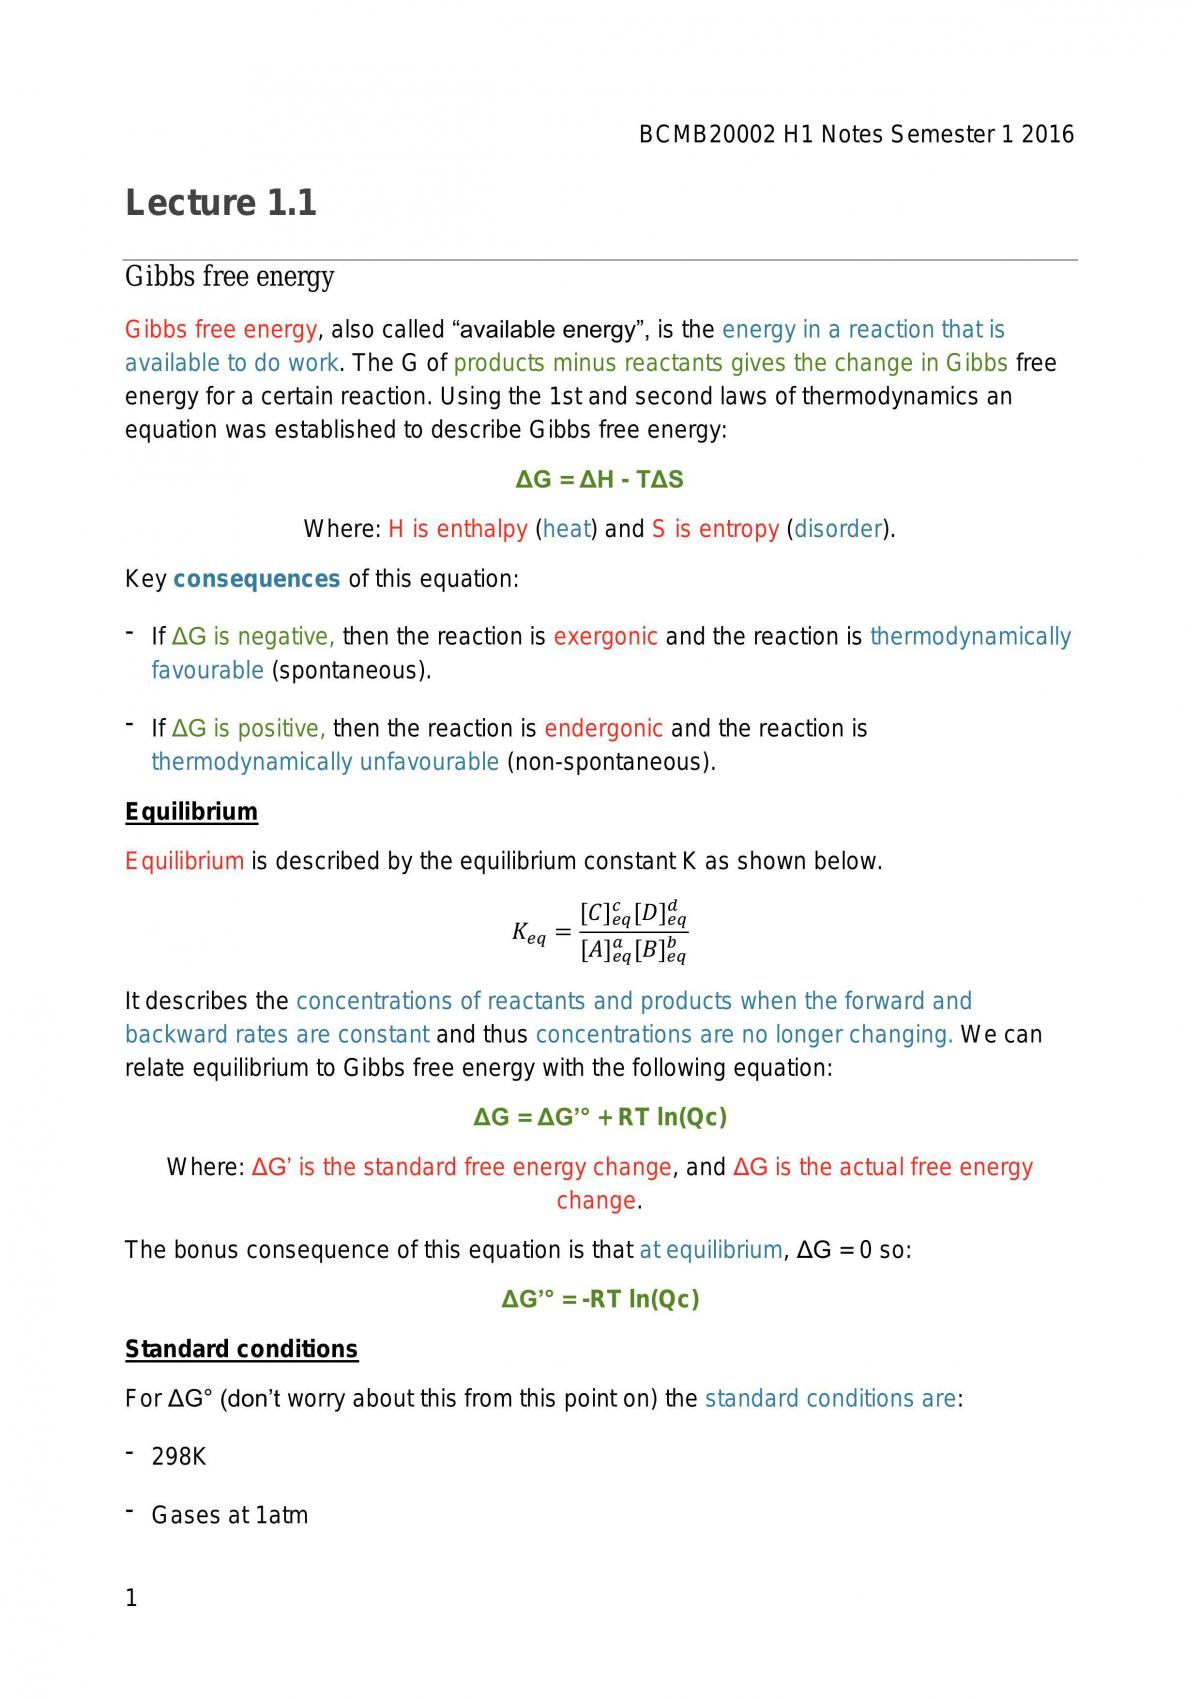 Biochemistry and Molecular Biology - Full lecture notes - Page 1